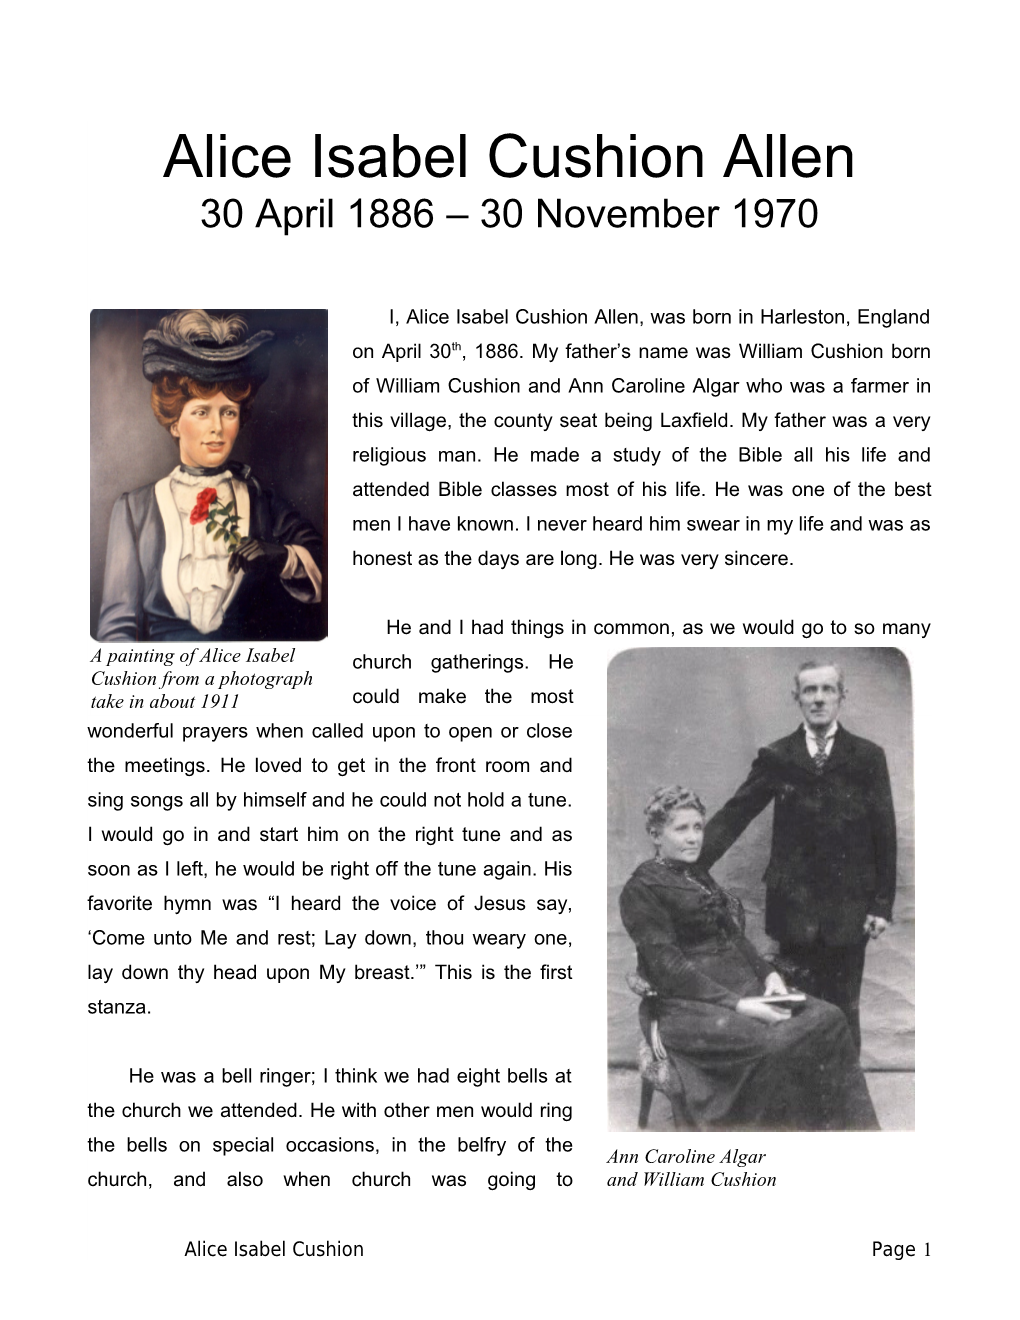 I, Alice Isabel Cushion Allen, Was Born in Harleston, England on April 30Th, 1886